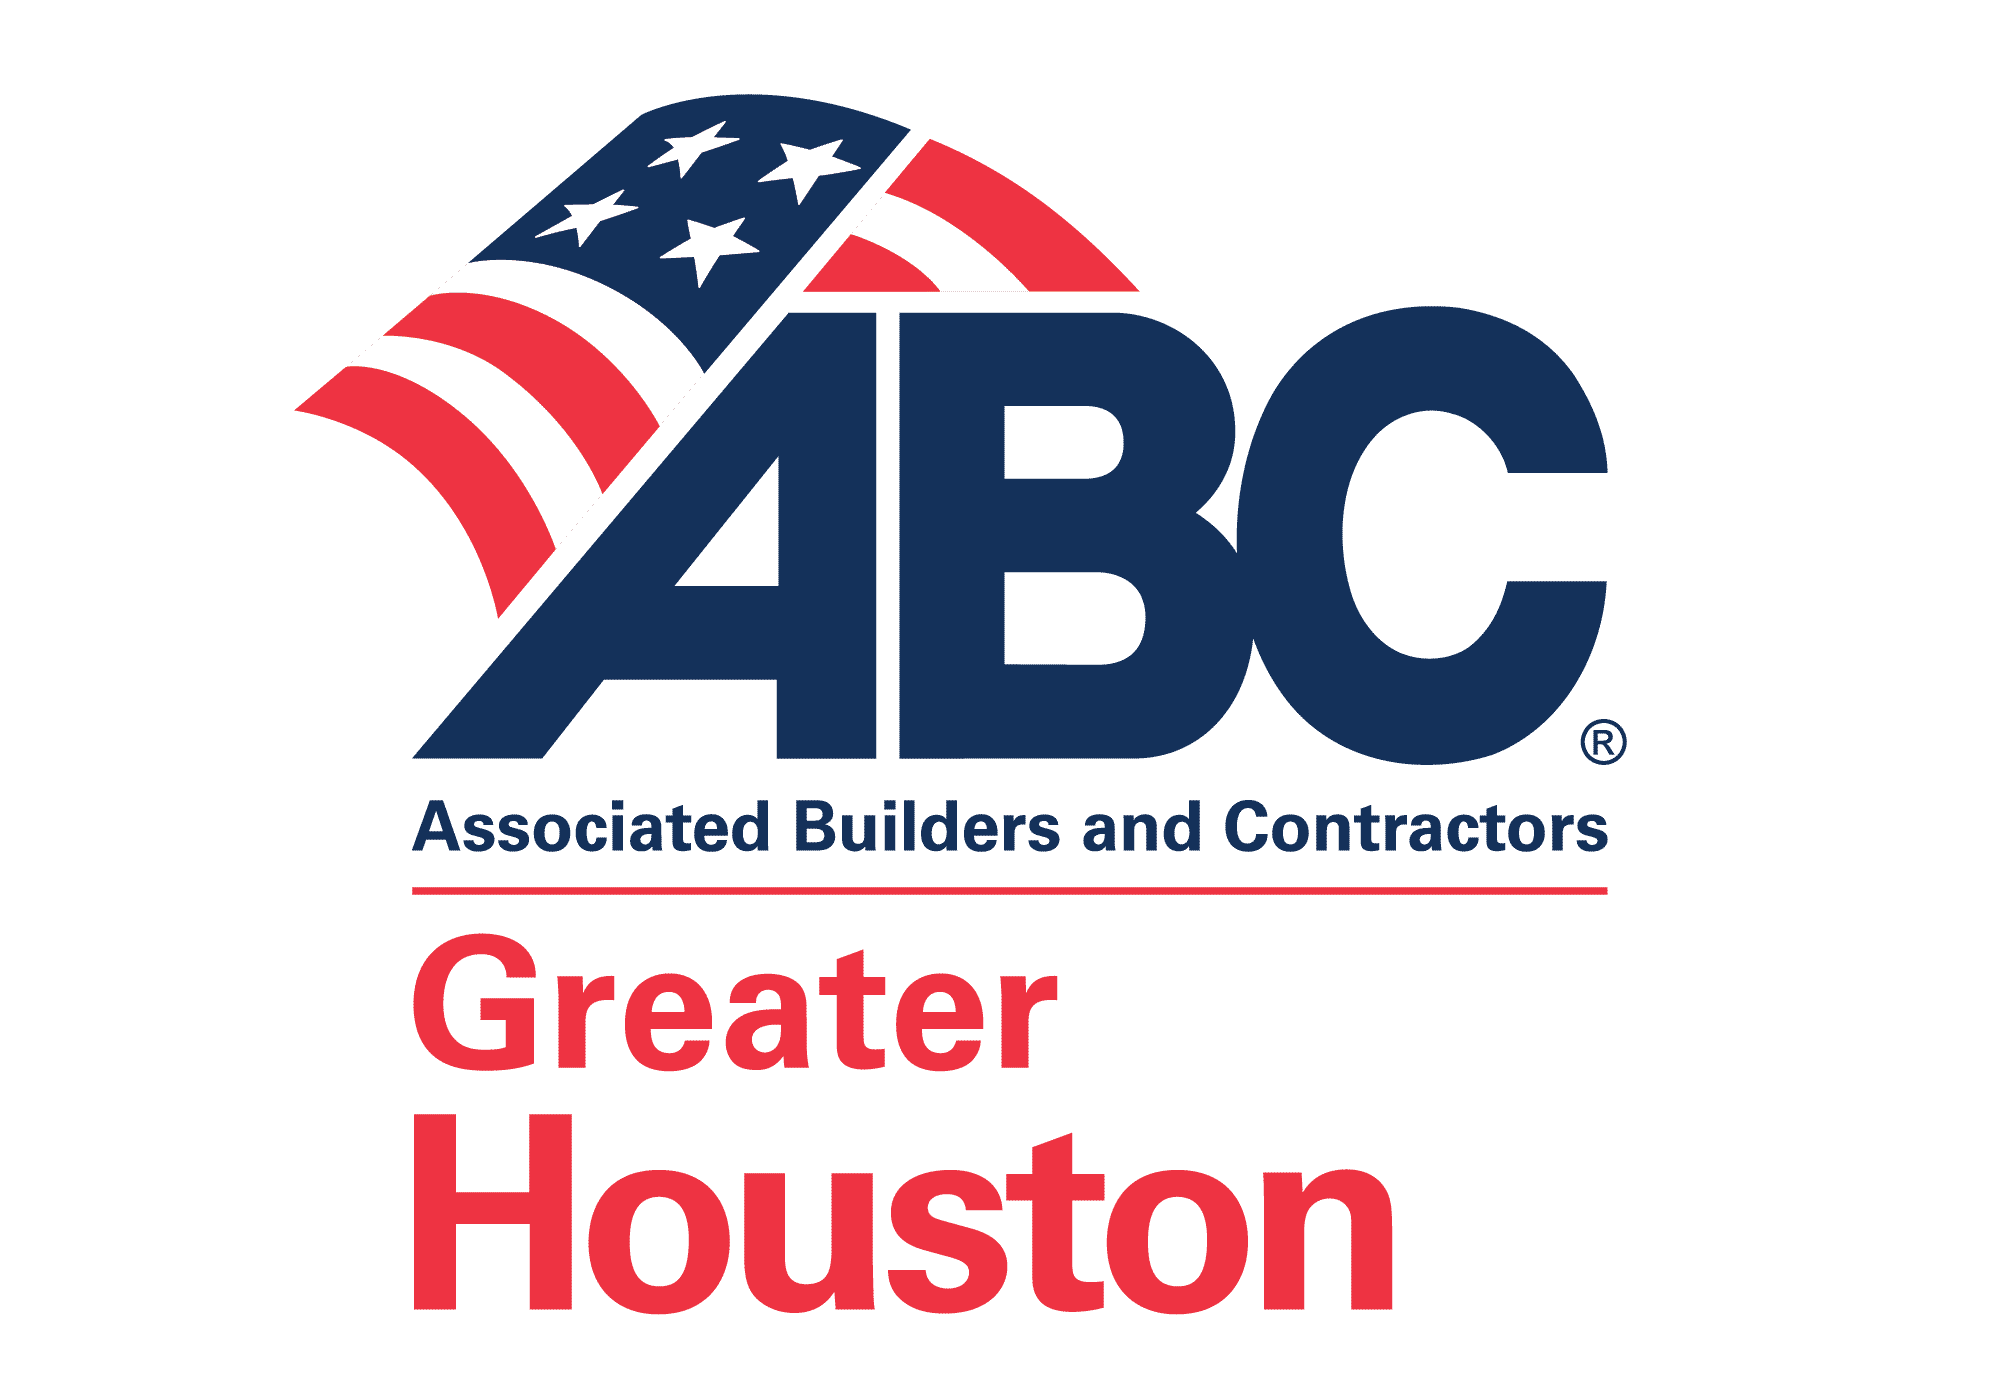 Associated Builders and Contractors Greater Houston PAC